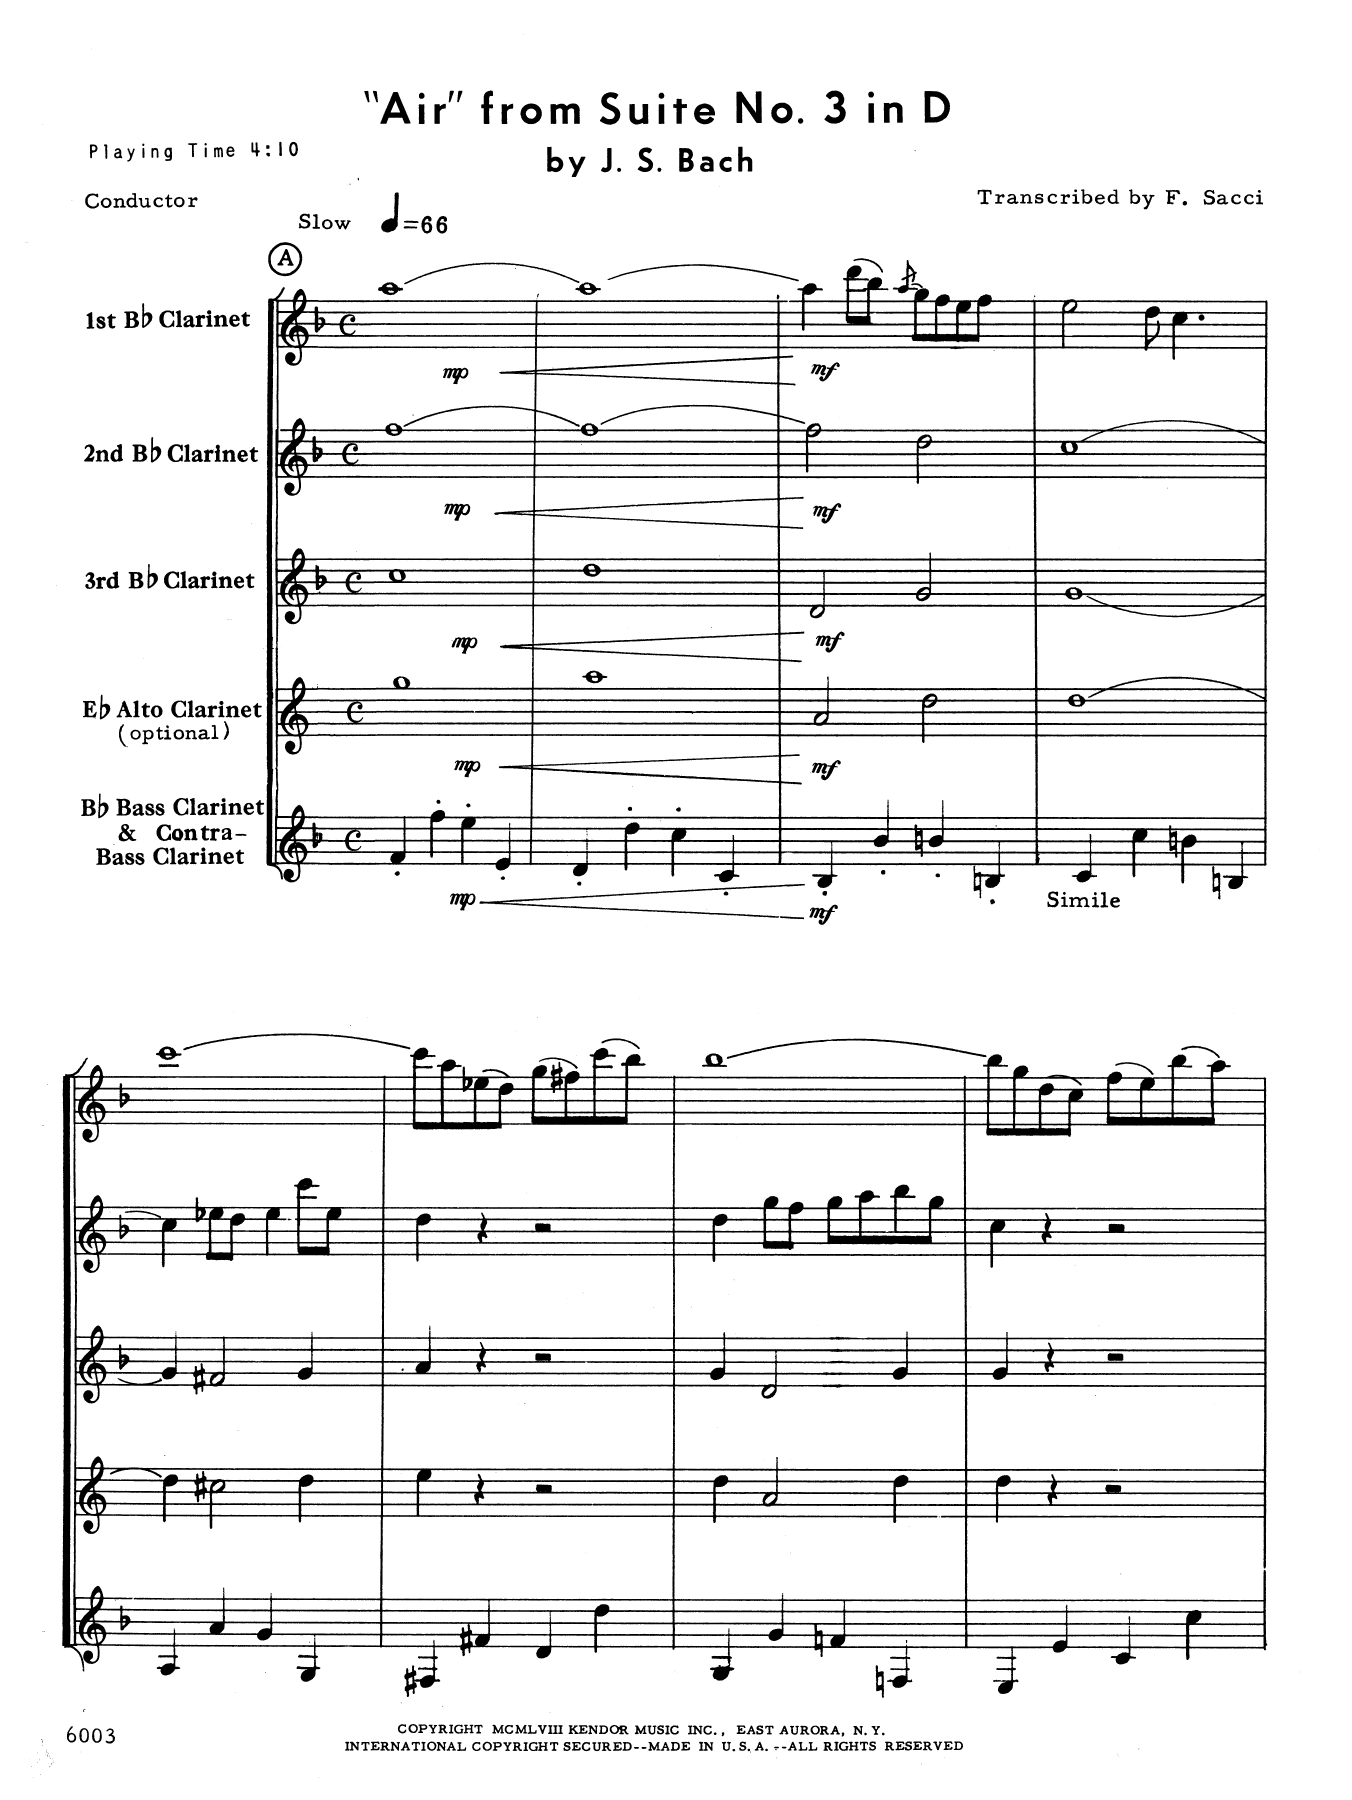 Download Frank J. Sacci Air From Suite #3 In D - Full Score Sheet Music